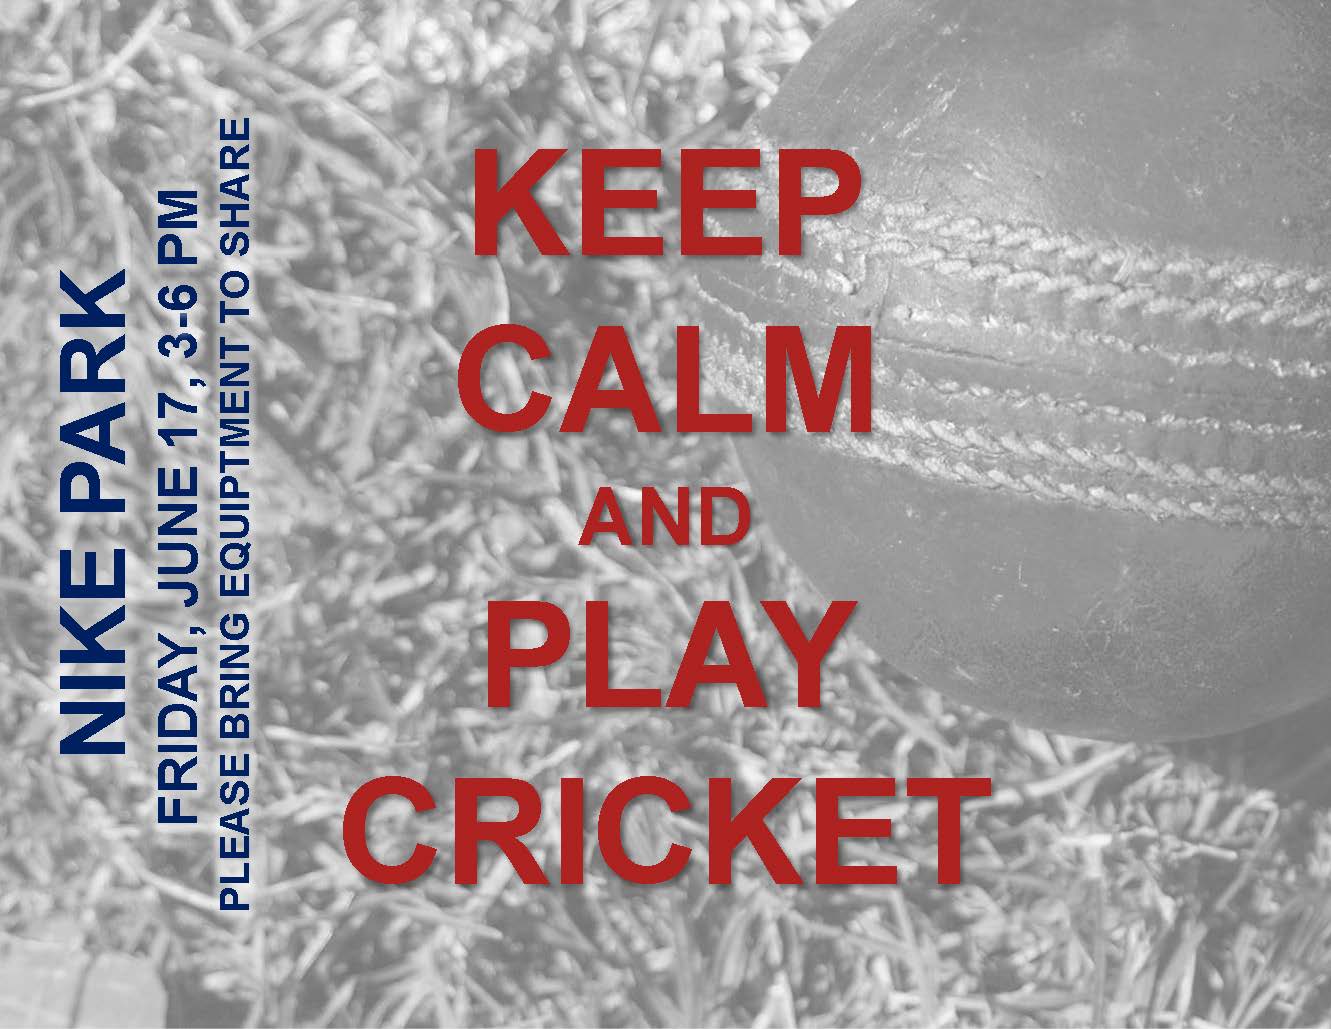 Cricket, Cricket – Competition Heating Up for Next Friday’s Match!